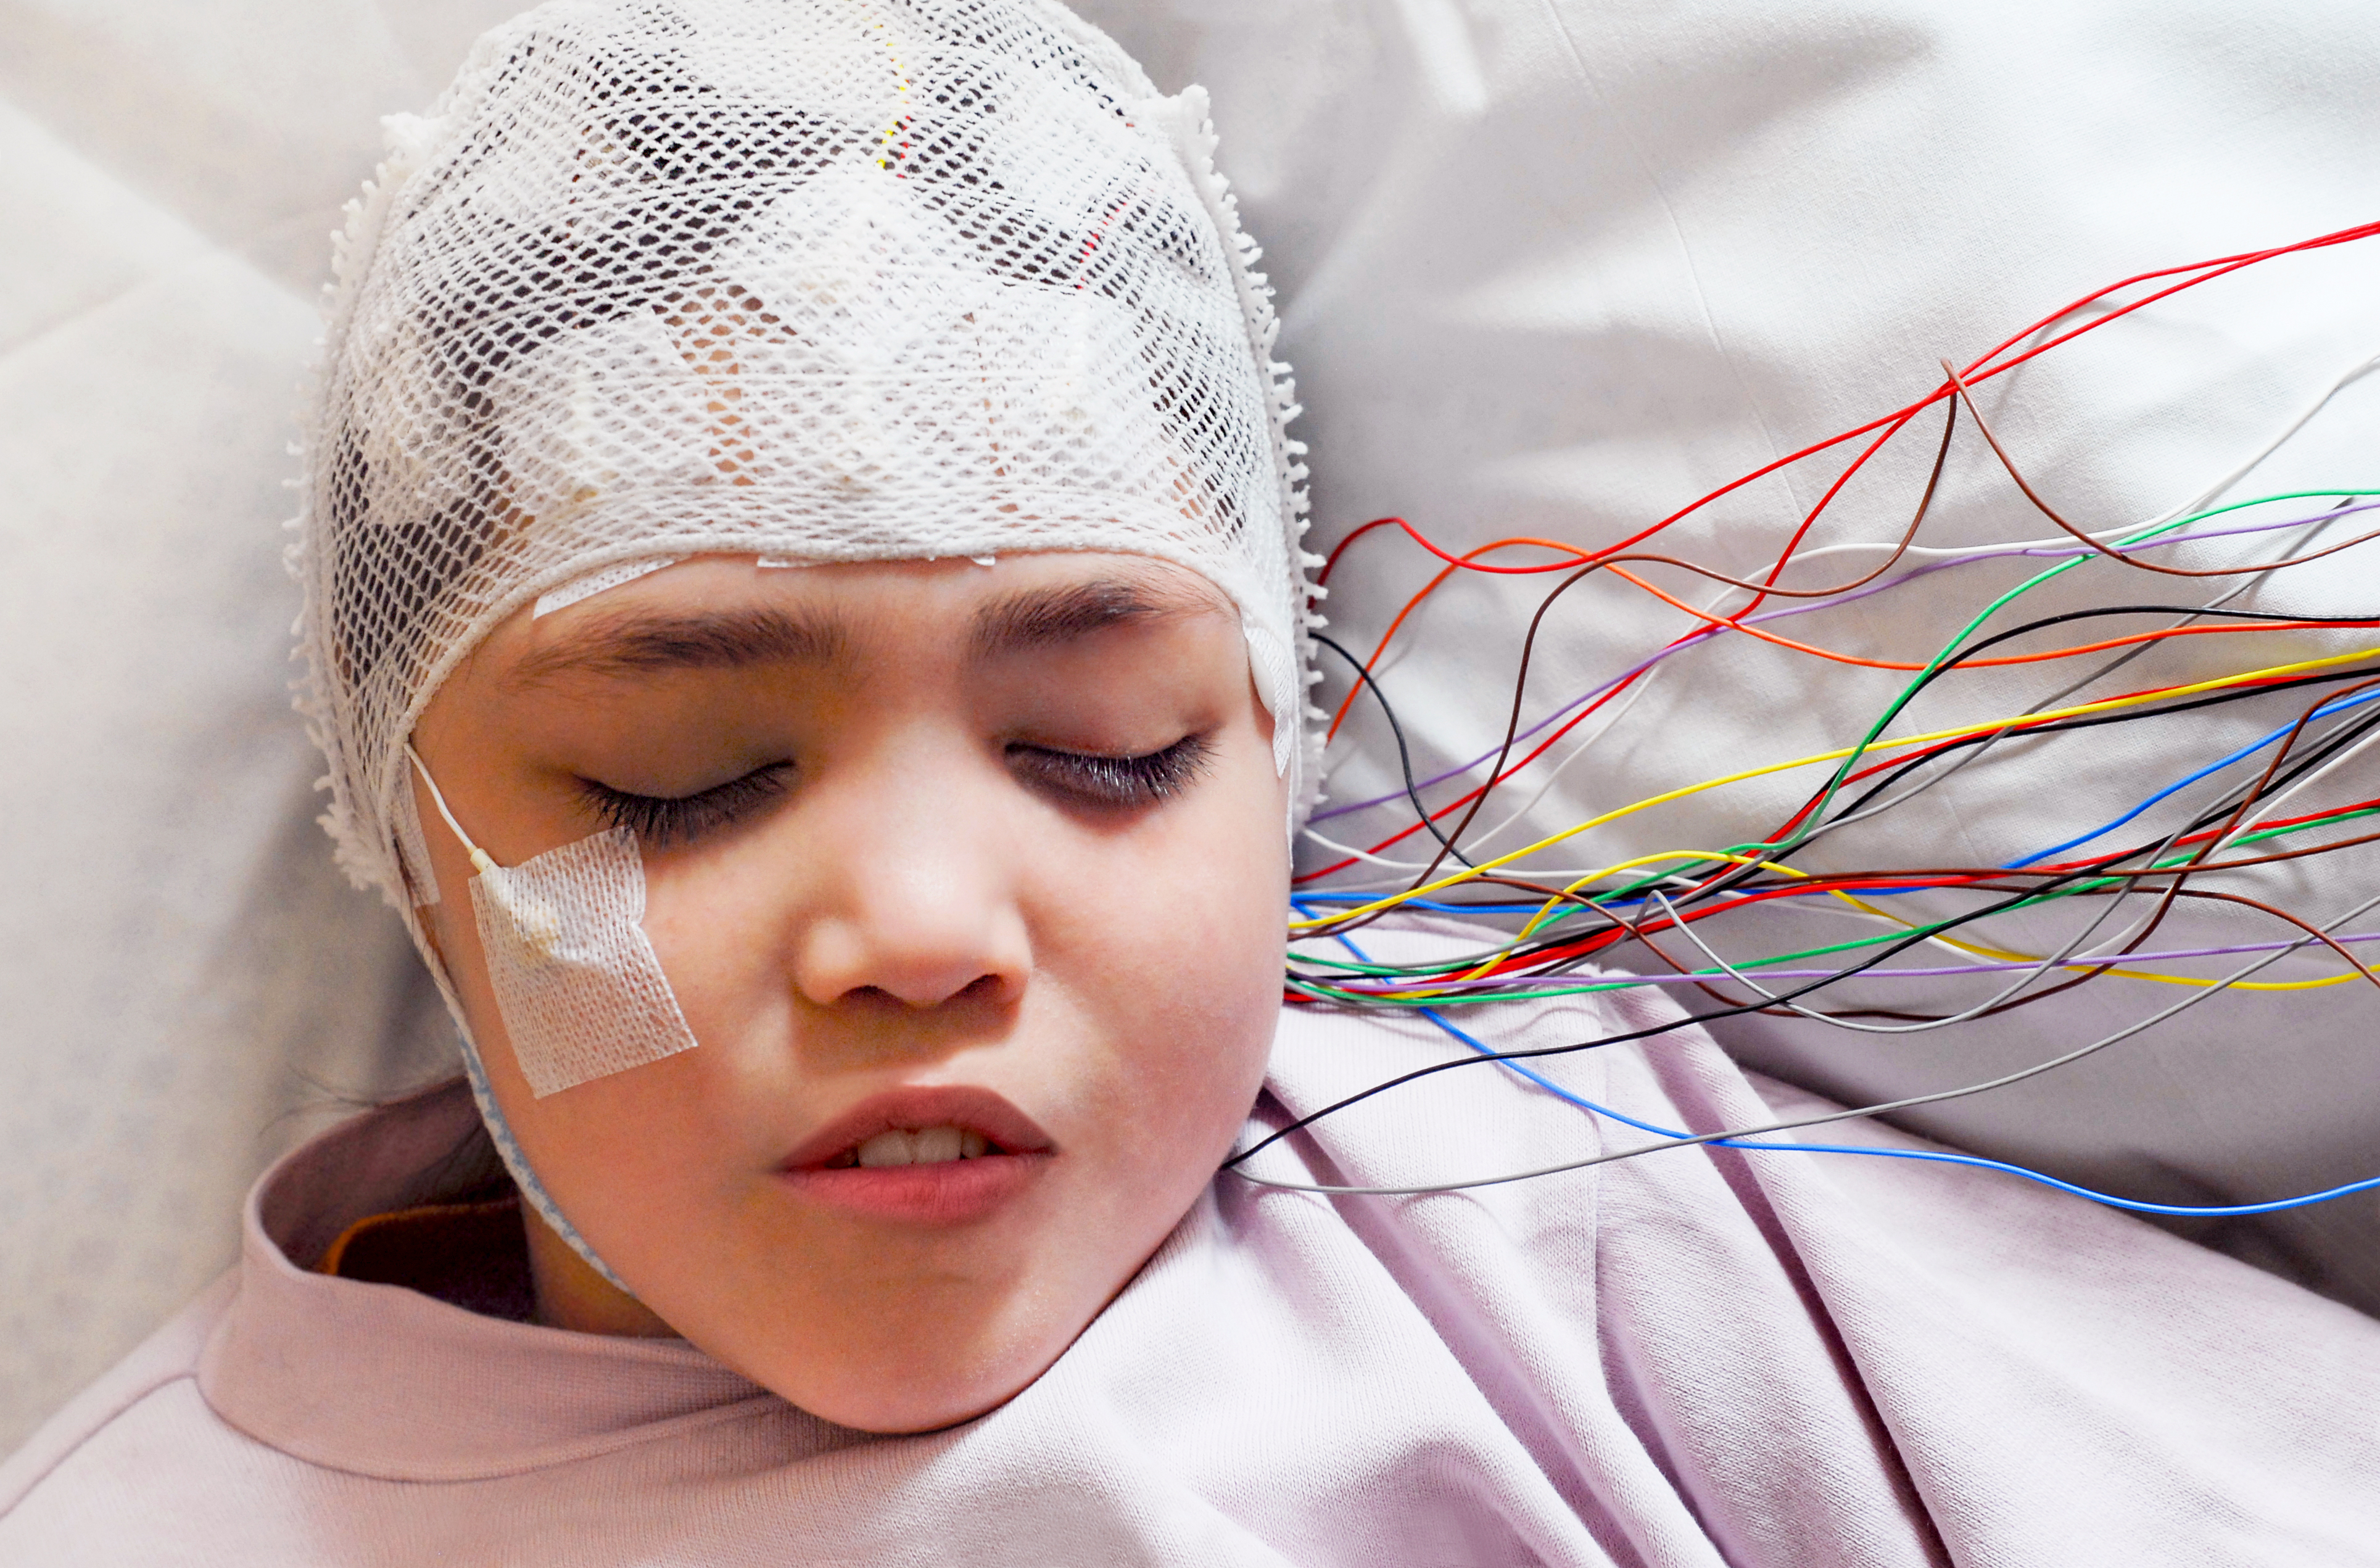 Refractory Seizures or Uncontrolled Epilepsy: Diagnosis and Treatment